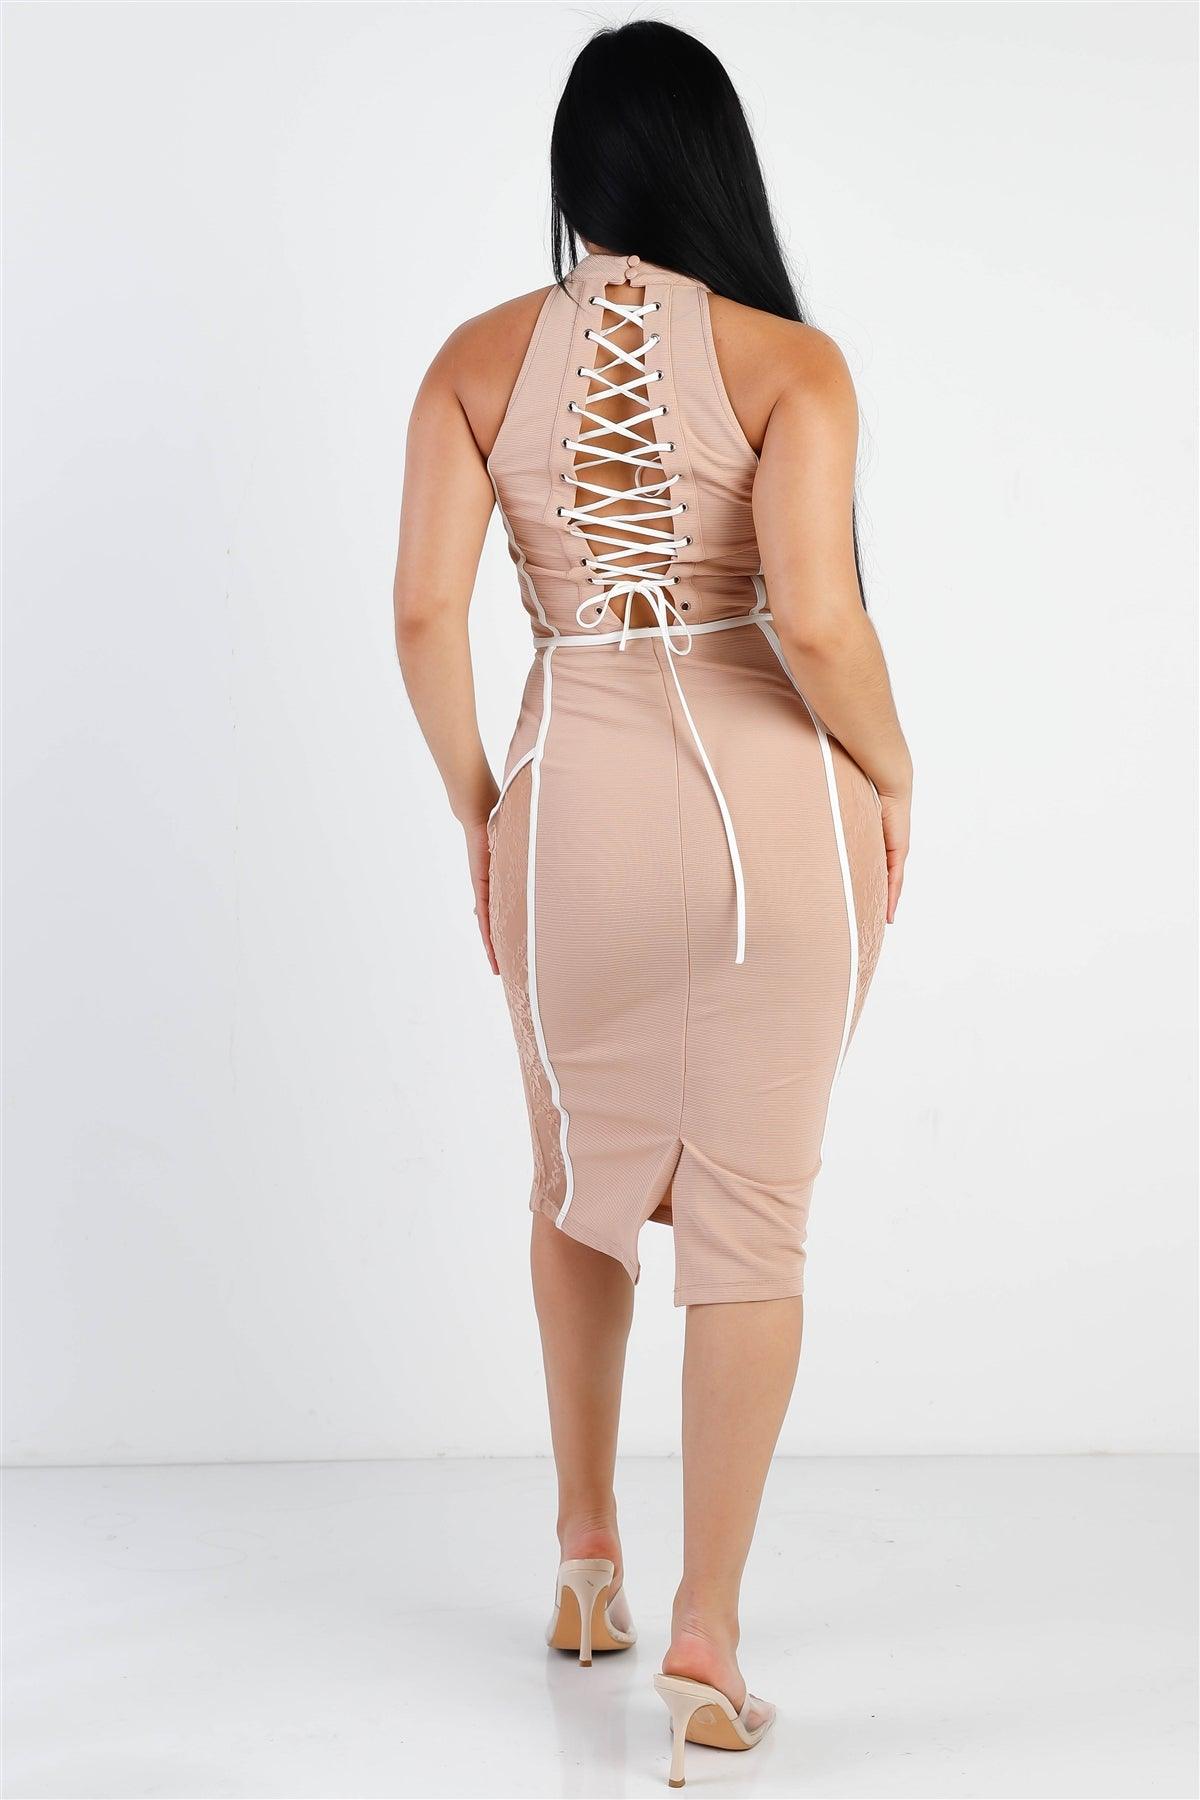 Nude Textured Lace Inserts White Stitch Details Back Lace Up Bodycon Midi Dress /3-2-1